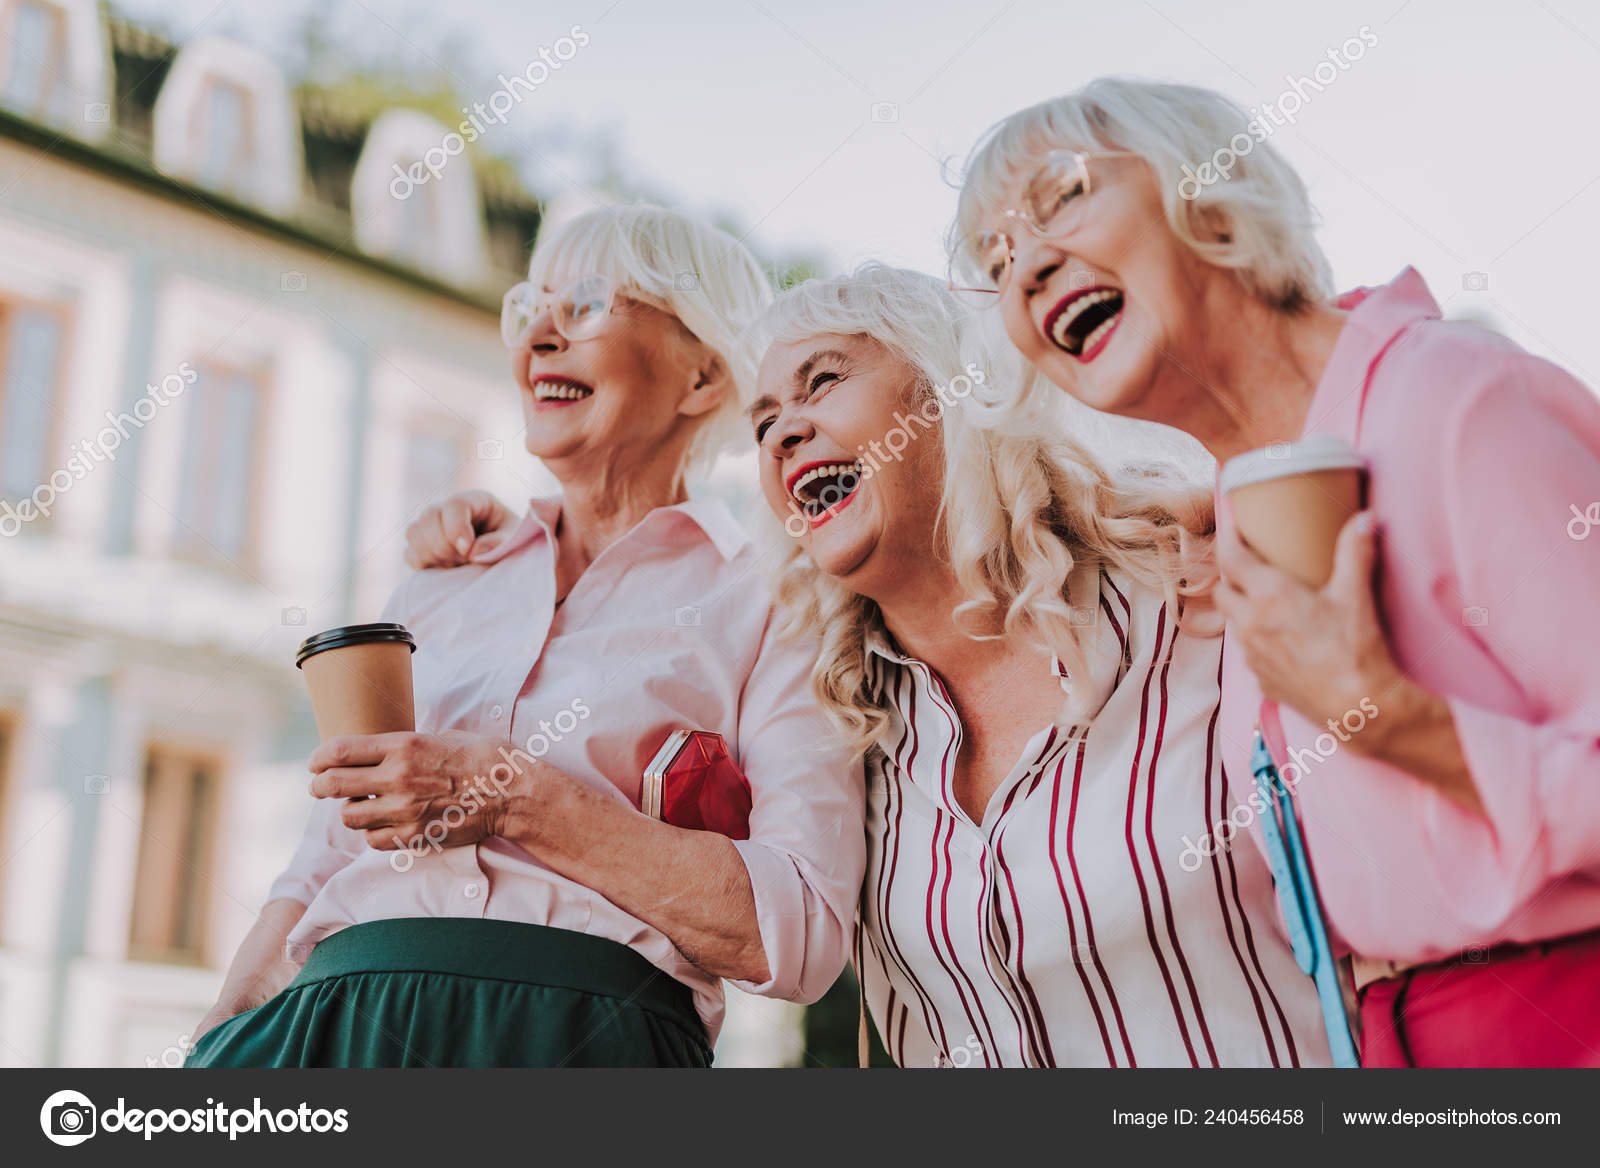 Funny old ladies Stock Photos, Royalty Free Funny old ladies Images |  Depositphotos